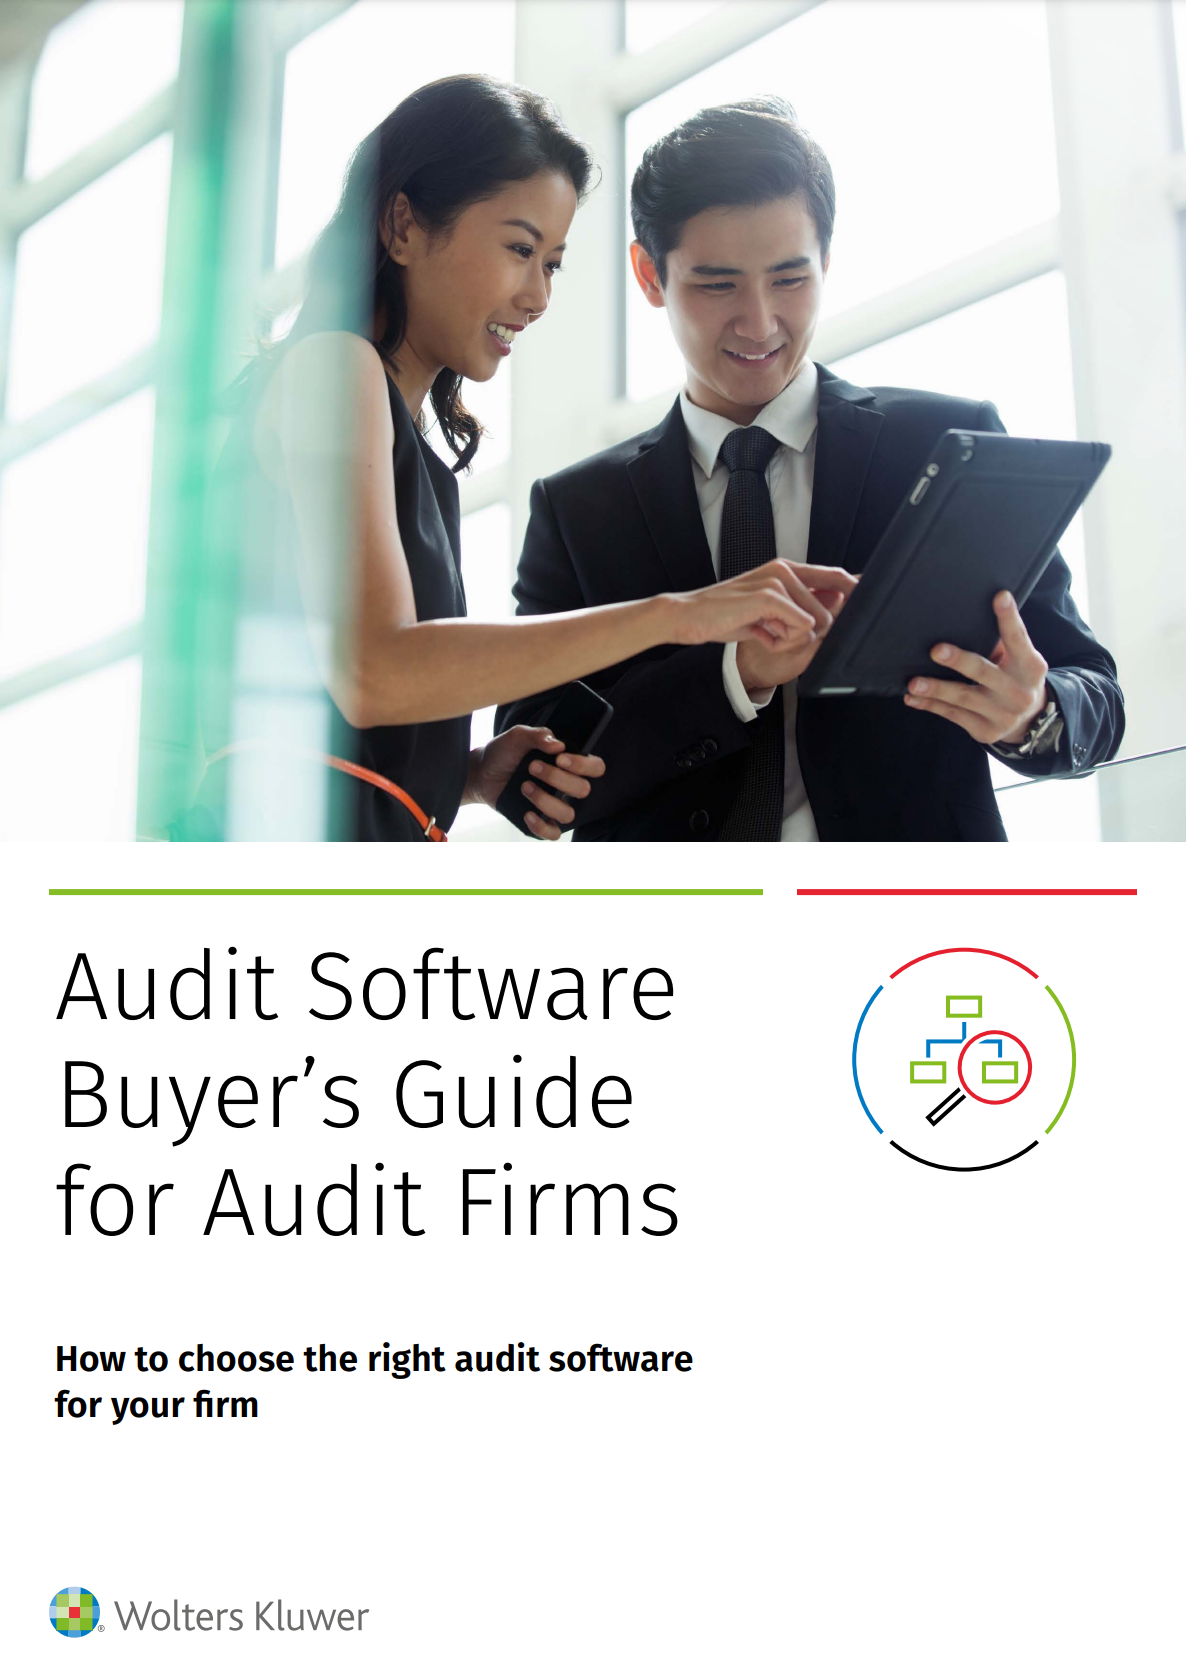 Audit software buyers guide cover image